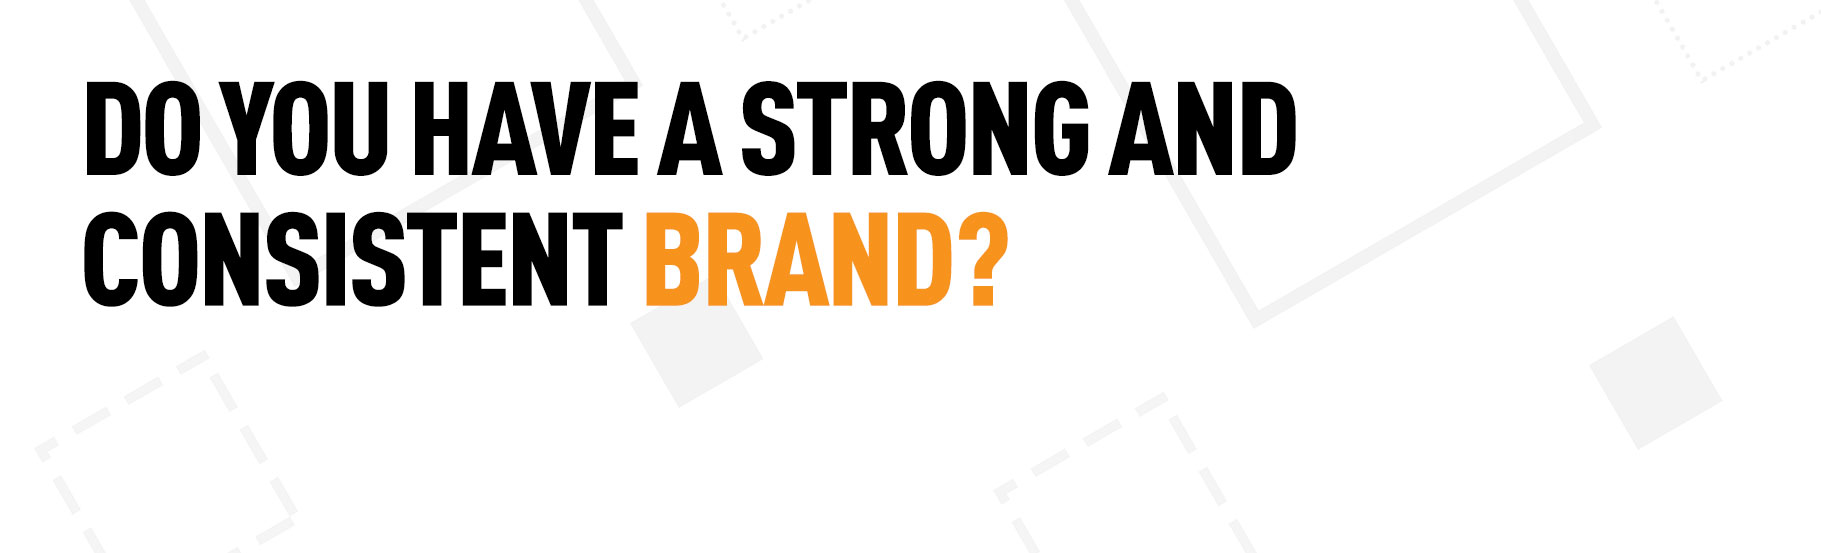 Do you have a strong and consistent brand?